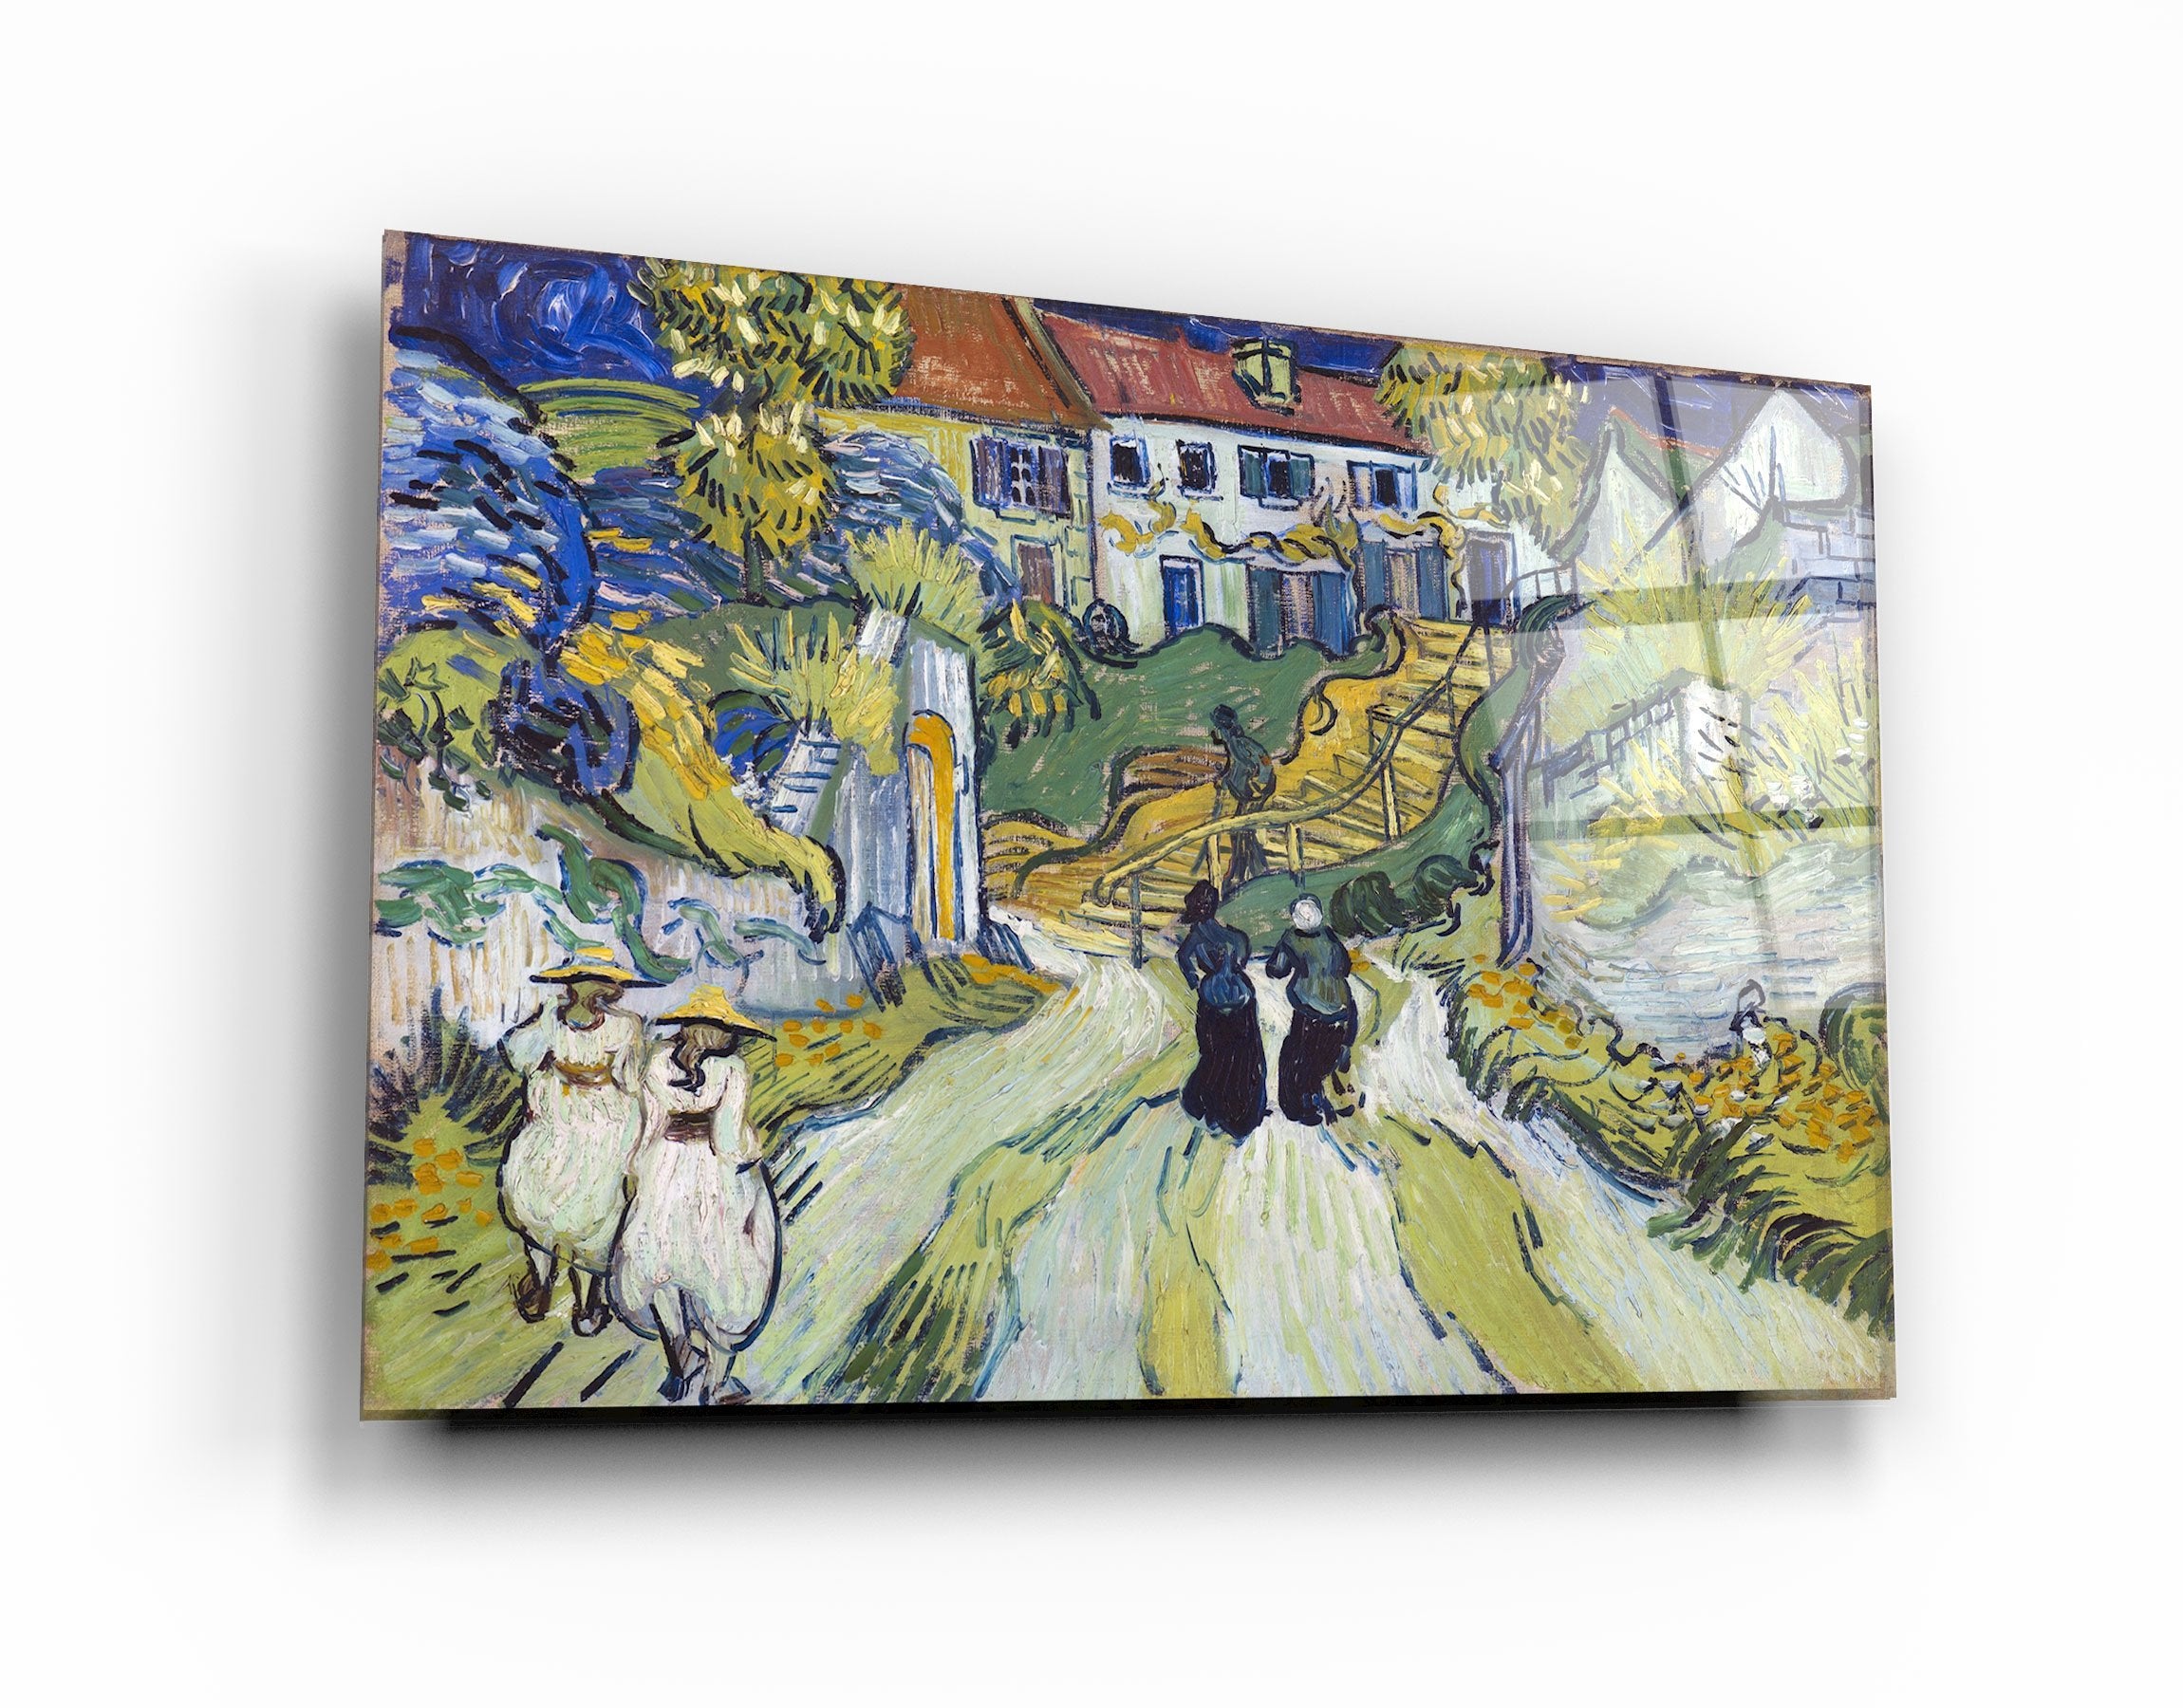 ・"Vincent van Gogh's Stairway at Auvers (1890)"・Glass Wall Art